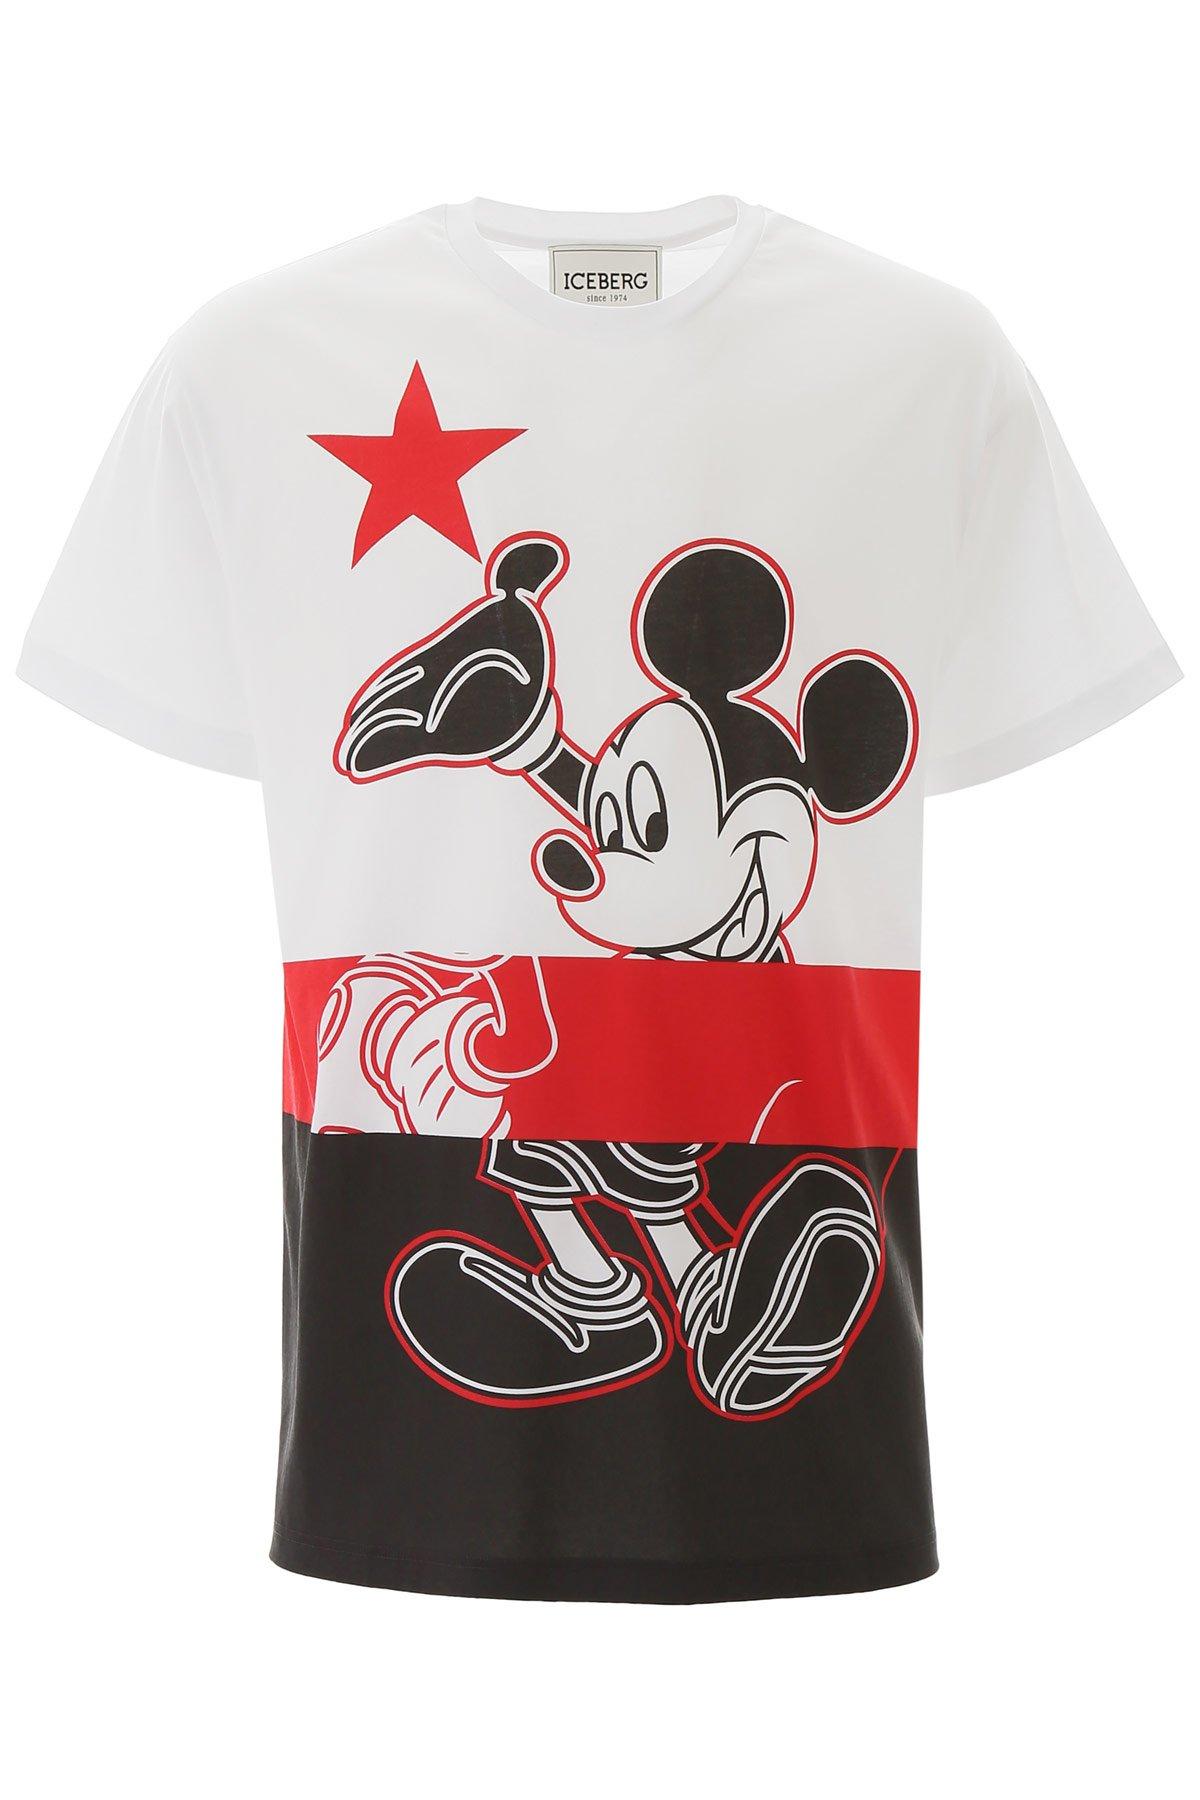 Iceberg Cotton Mickey Mouse T-shirt in Red for Men - Lyst